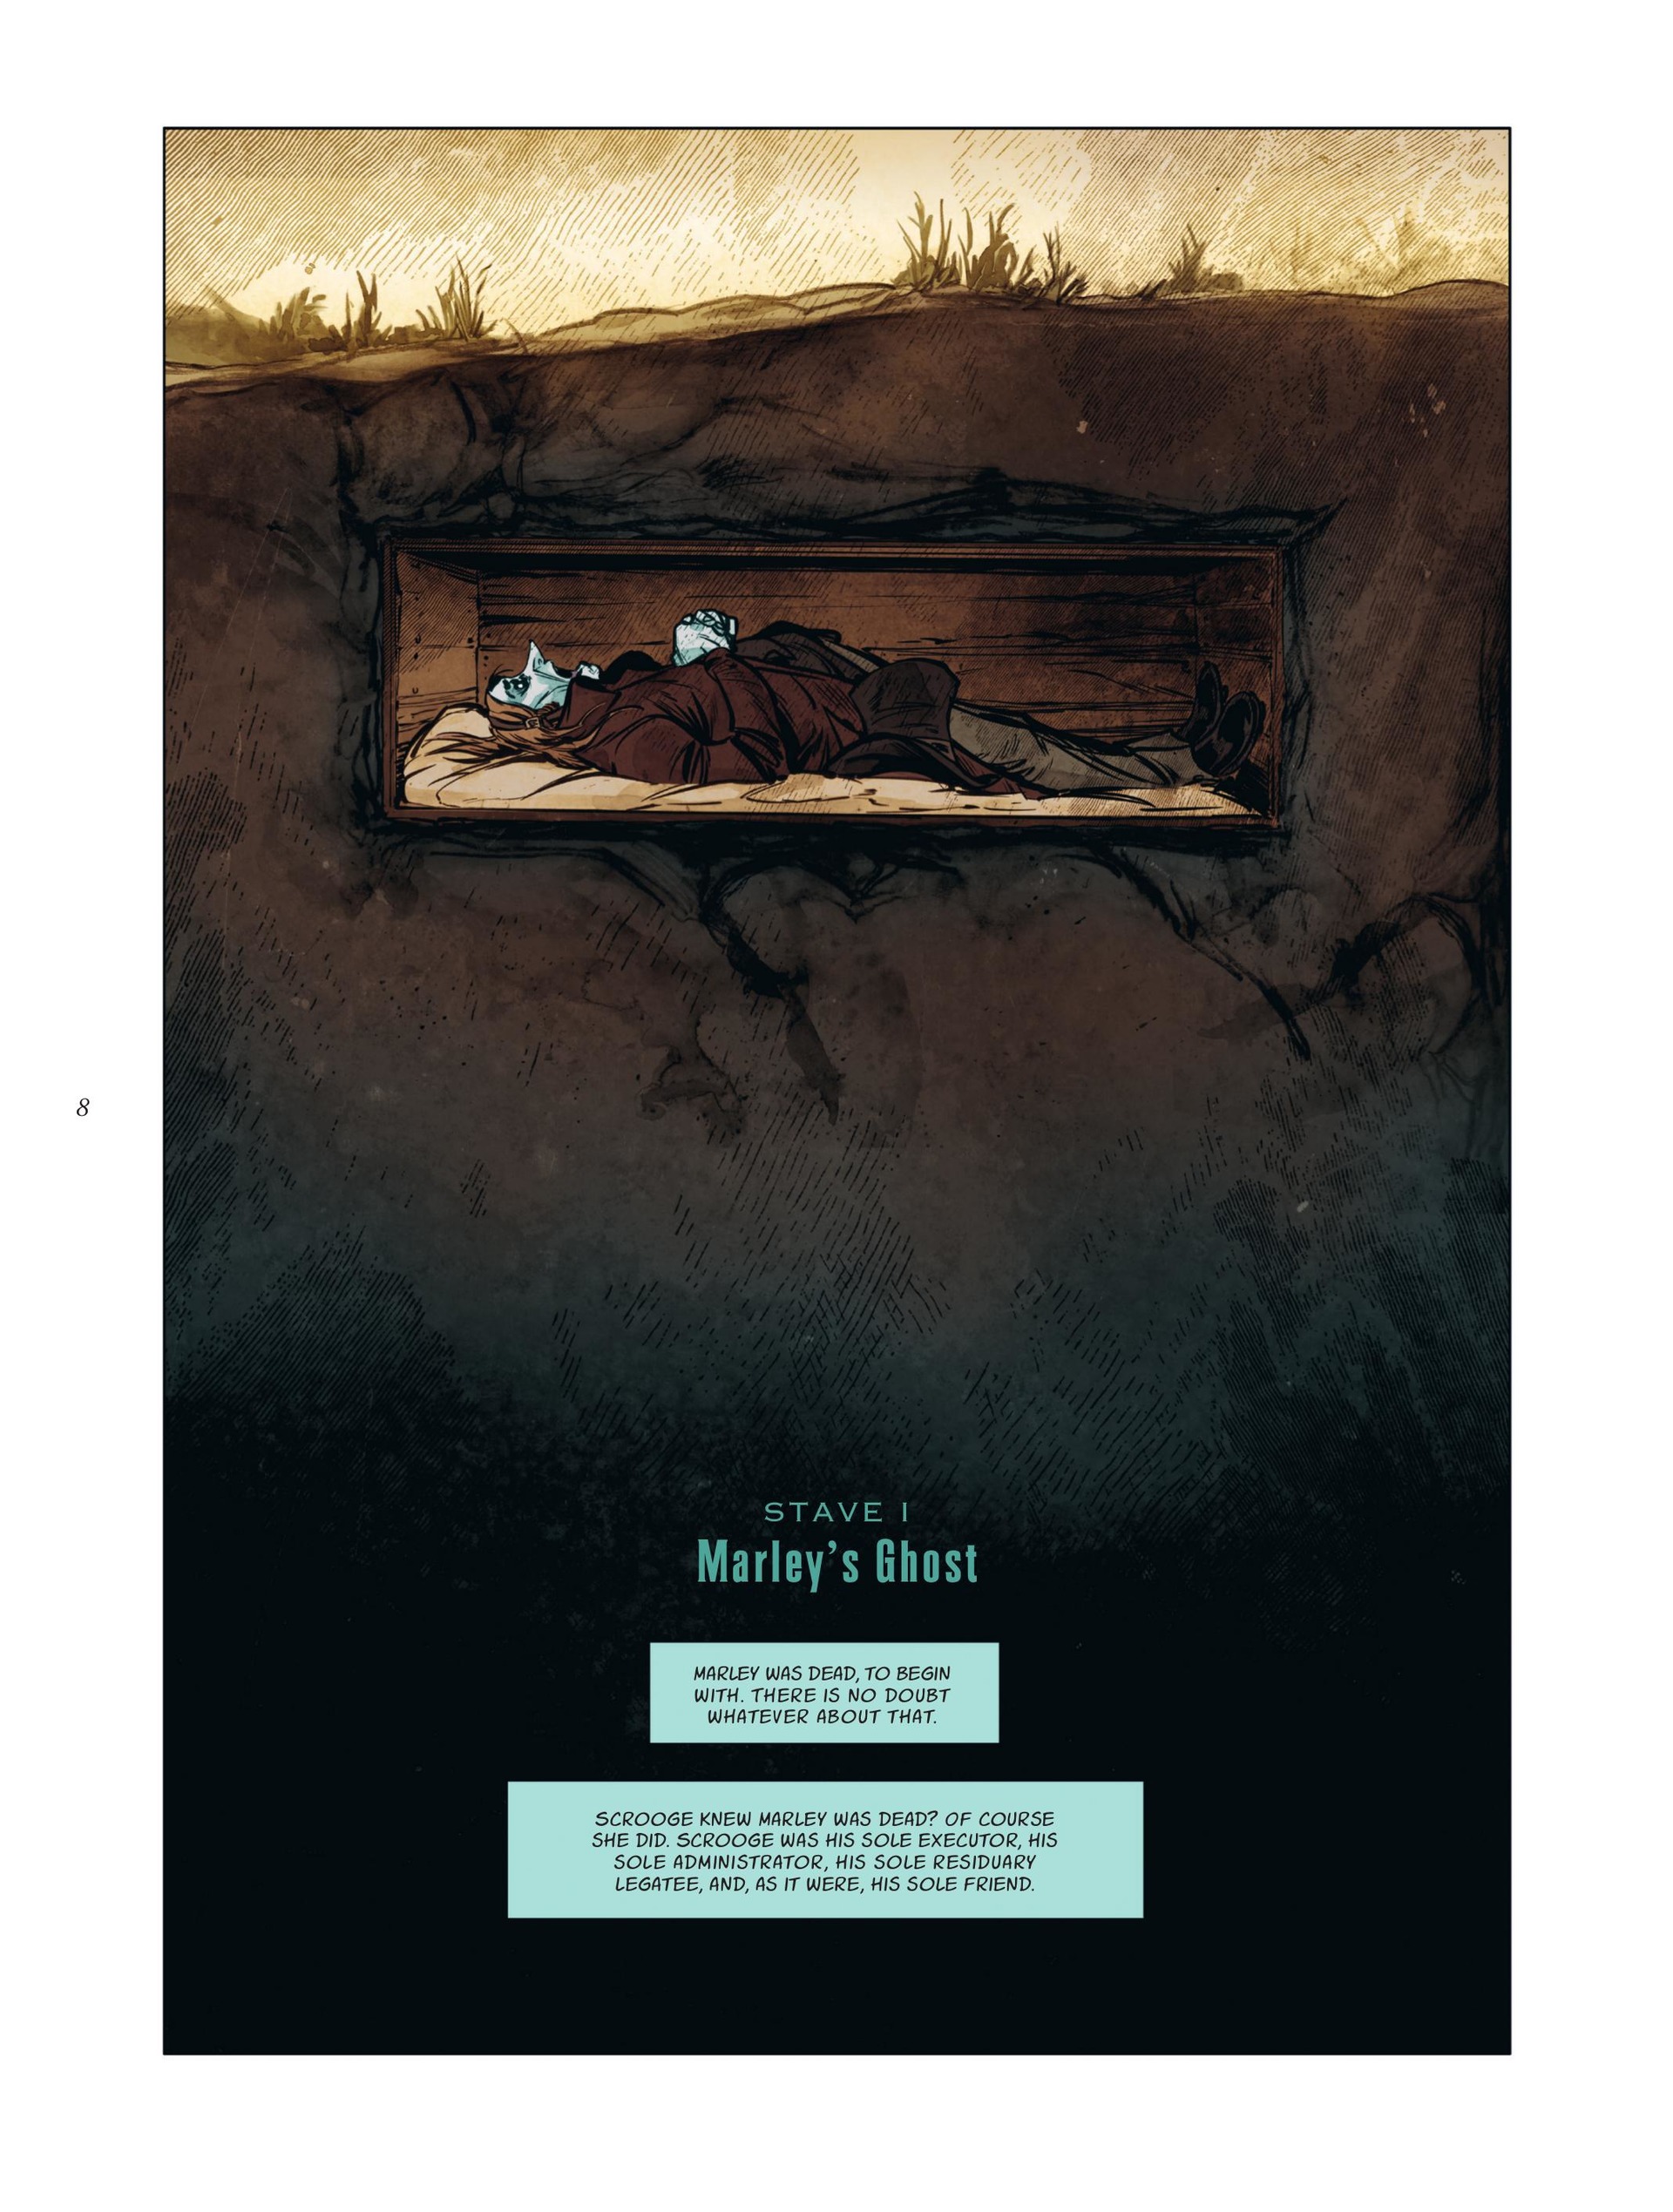 Read online A Christmas Carol: A Ghost Story comic -  Issue # Full - 10